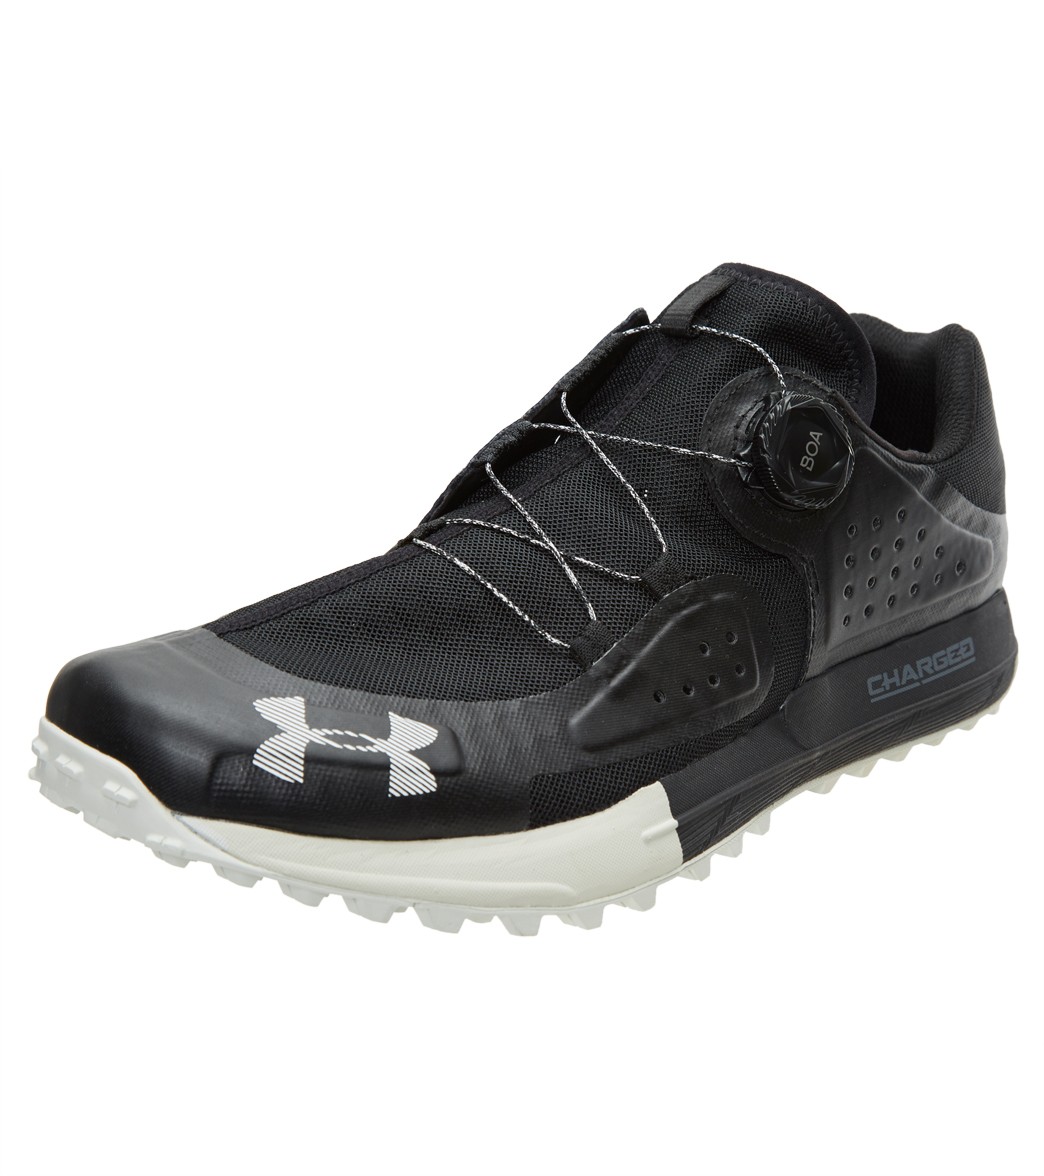 Under Armour Men's Syncline Water Shoe 